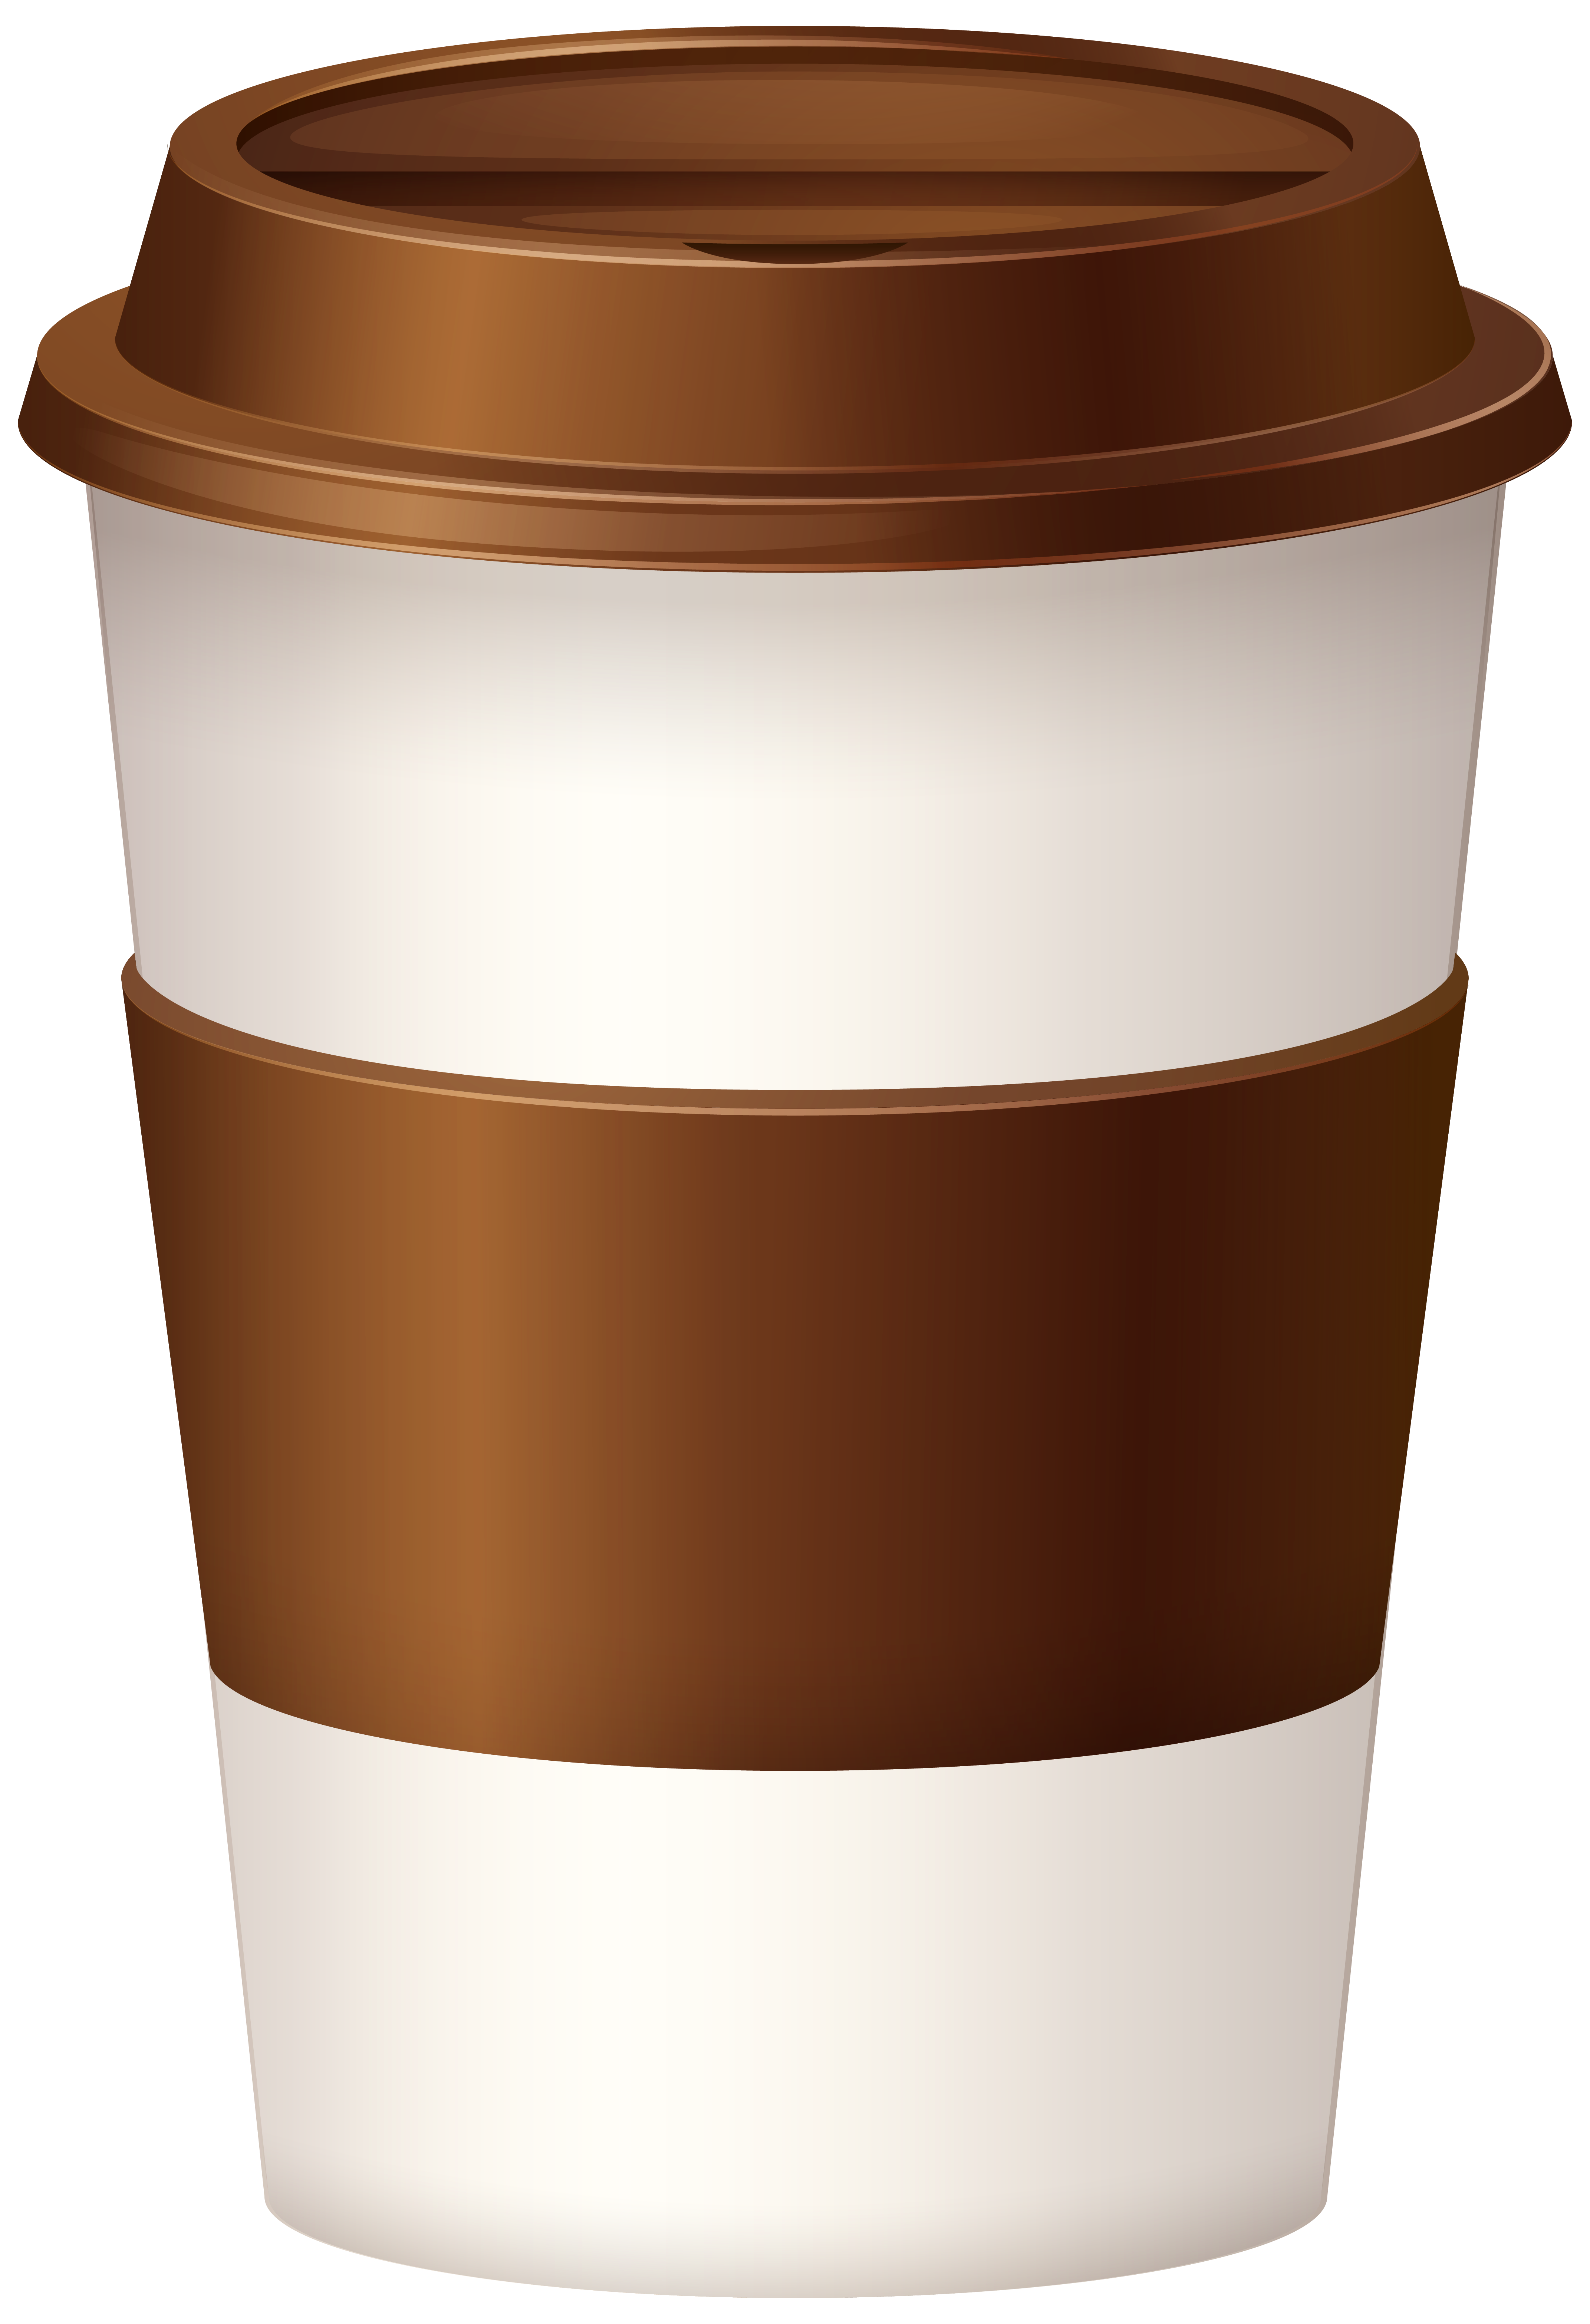 coffee cup illustration free download